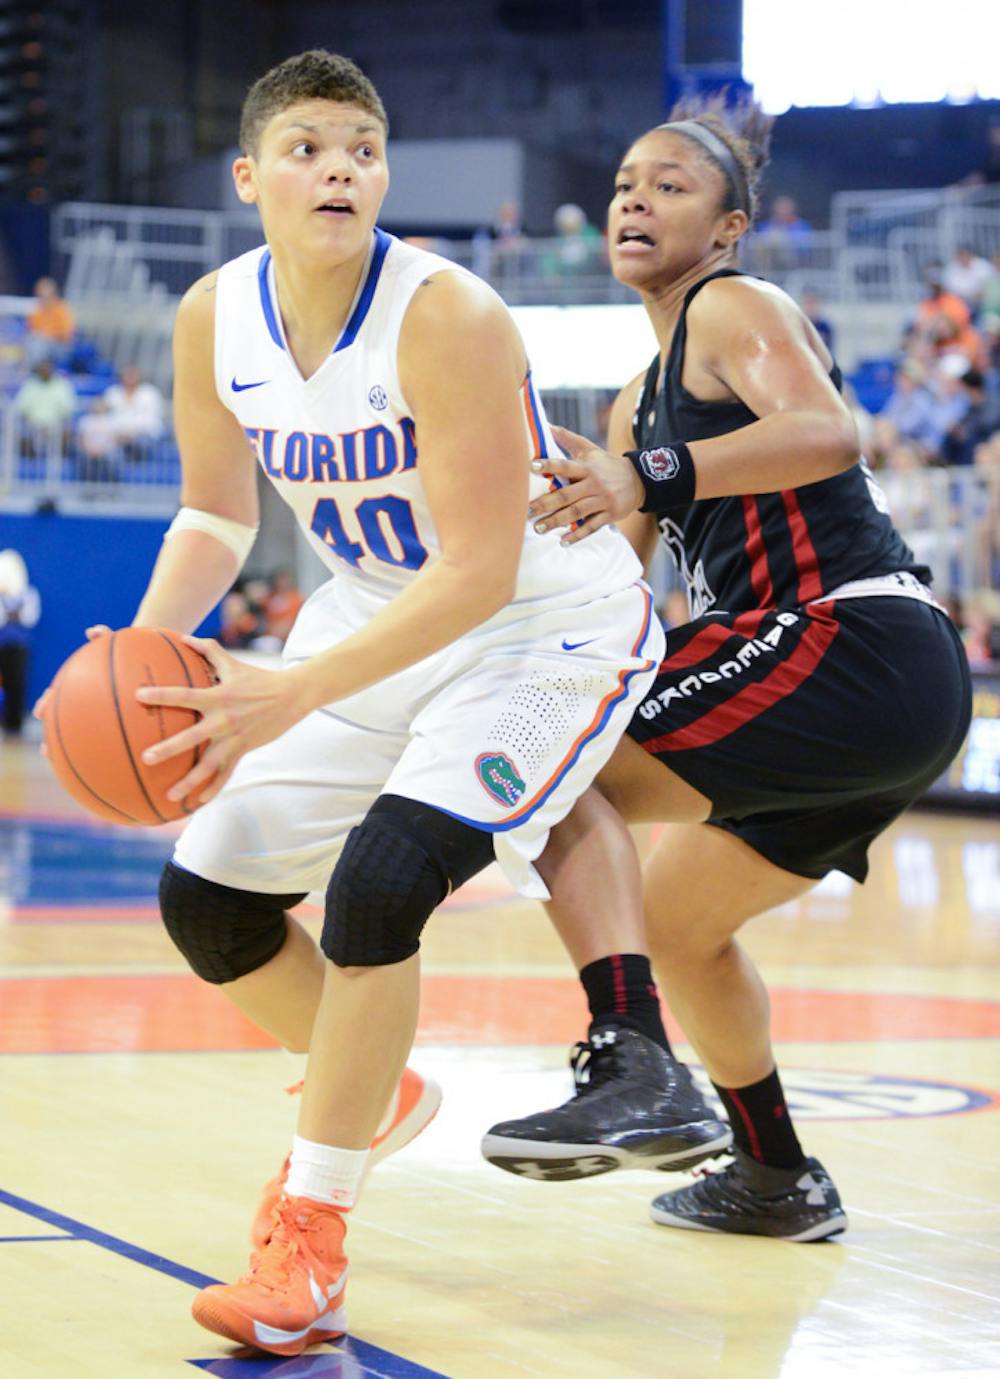 <p><span>Sydney Moss (40) pivots in Florida’s 52-44 loss to South Carolina on Jan. 20 in the O’Connell Center. Moss scored a career-high 22 points in Florida's 82-73 loss to Tennessee on Friday. </span></p>
<div><span><br /></span></div>